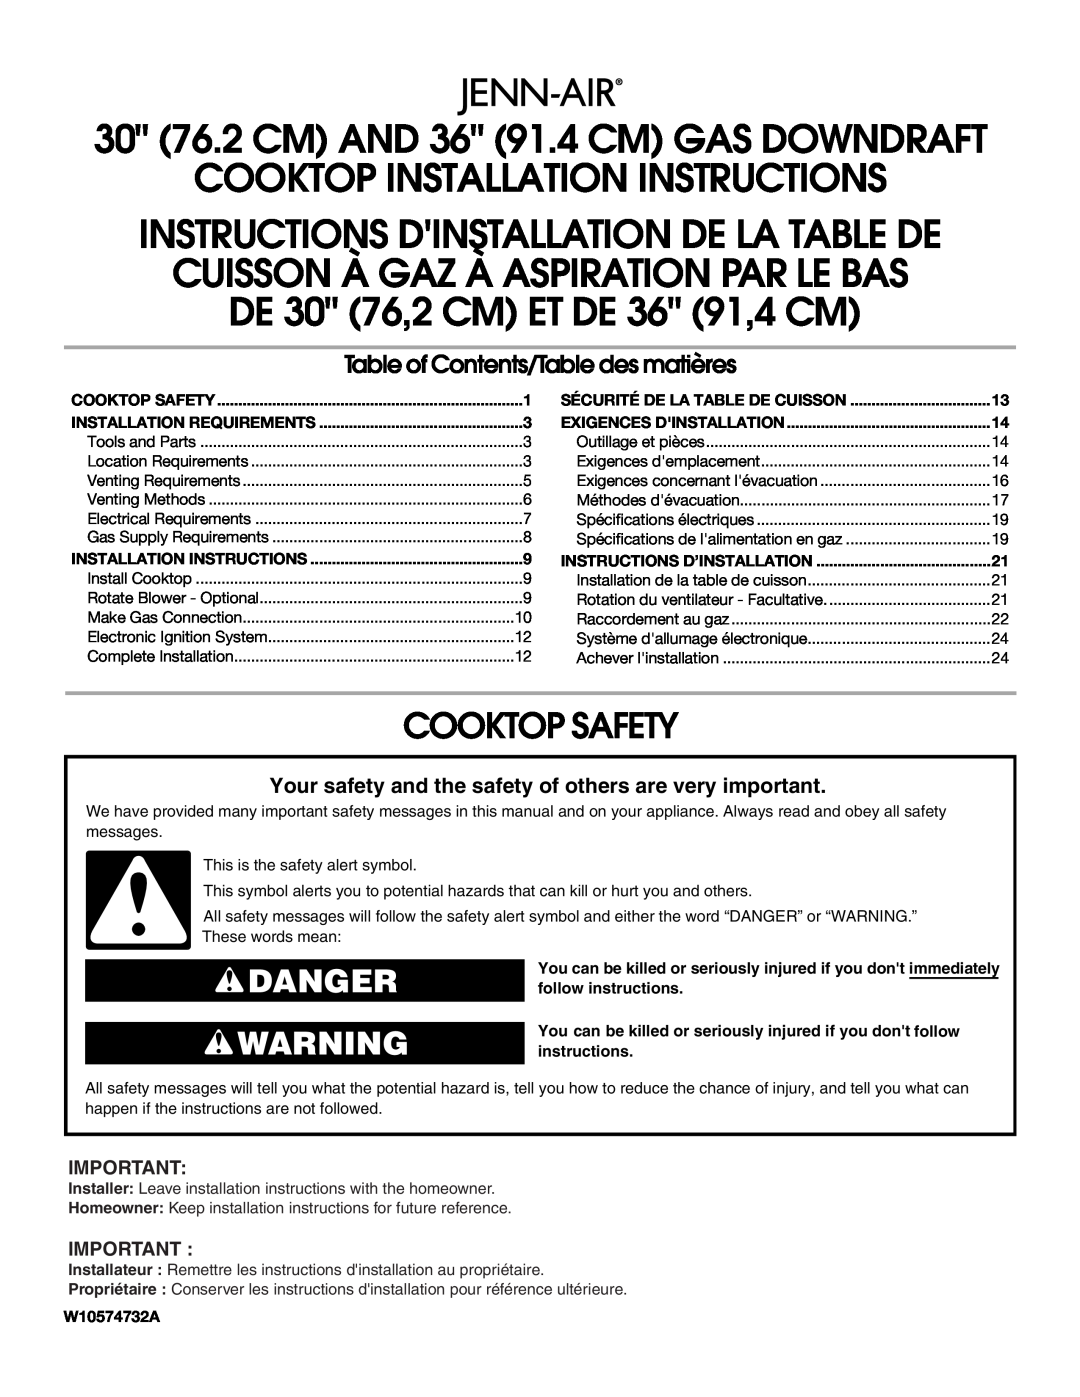 Jenn-Air W10574732A installation instructions Cooktop Safety, Danger, 30 76.2 CM AND 36 91.4 CM GAS DOWNDRAFT 